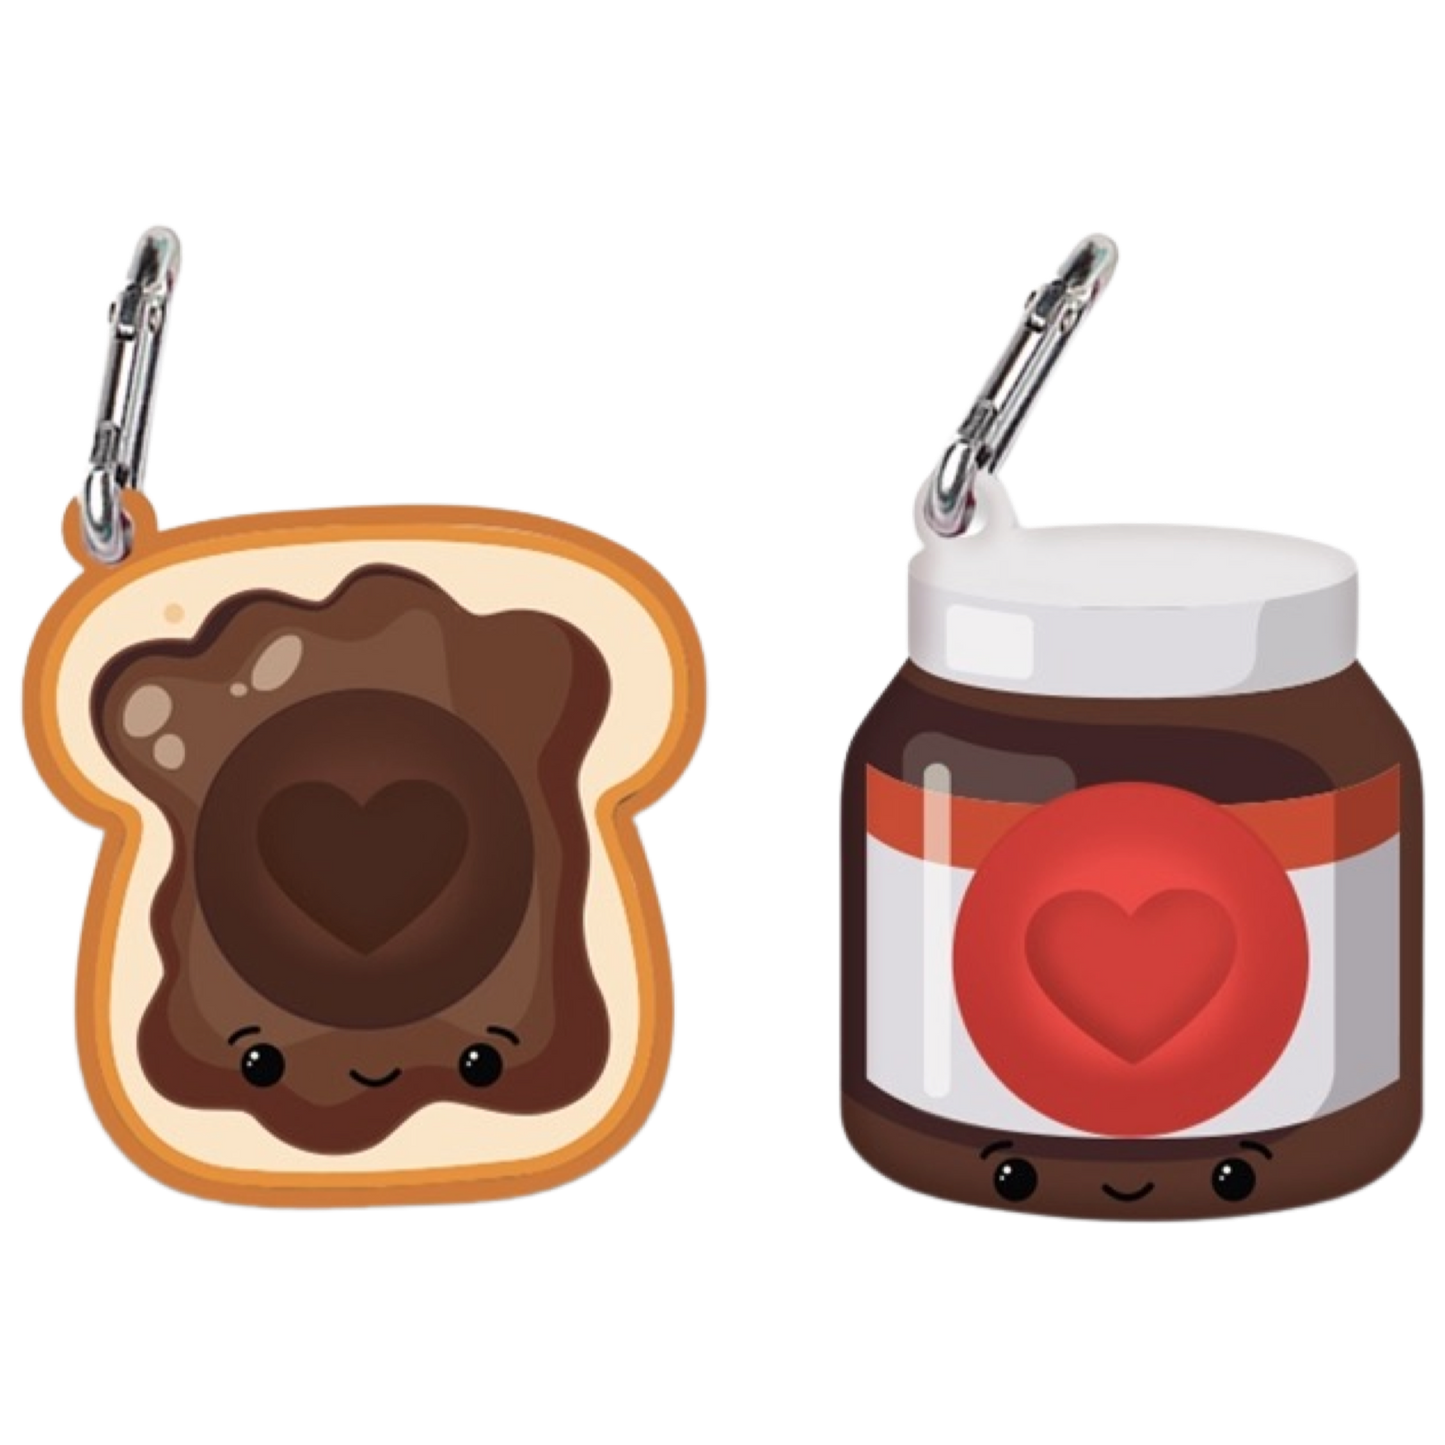 BFF Nutella and Toast Dimple